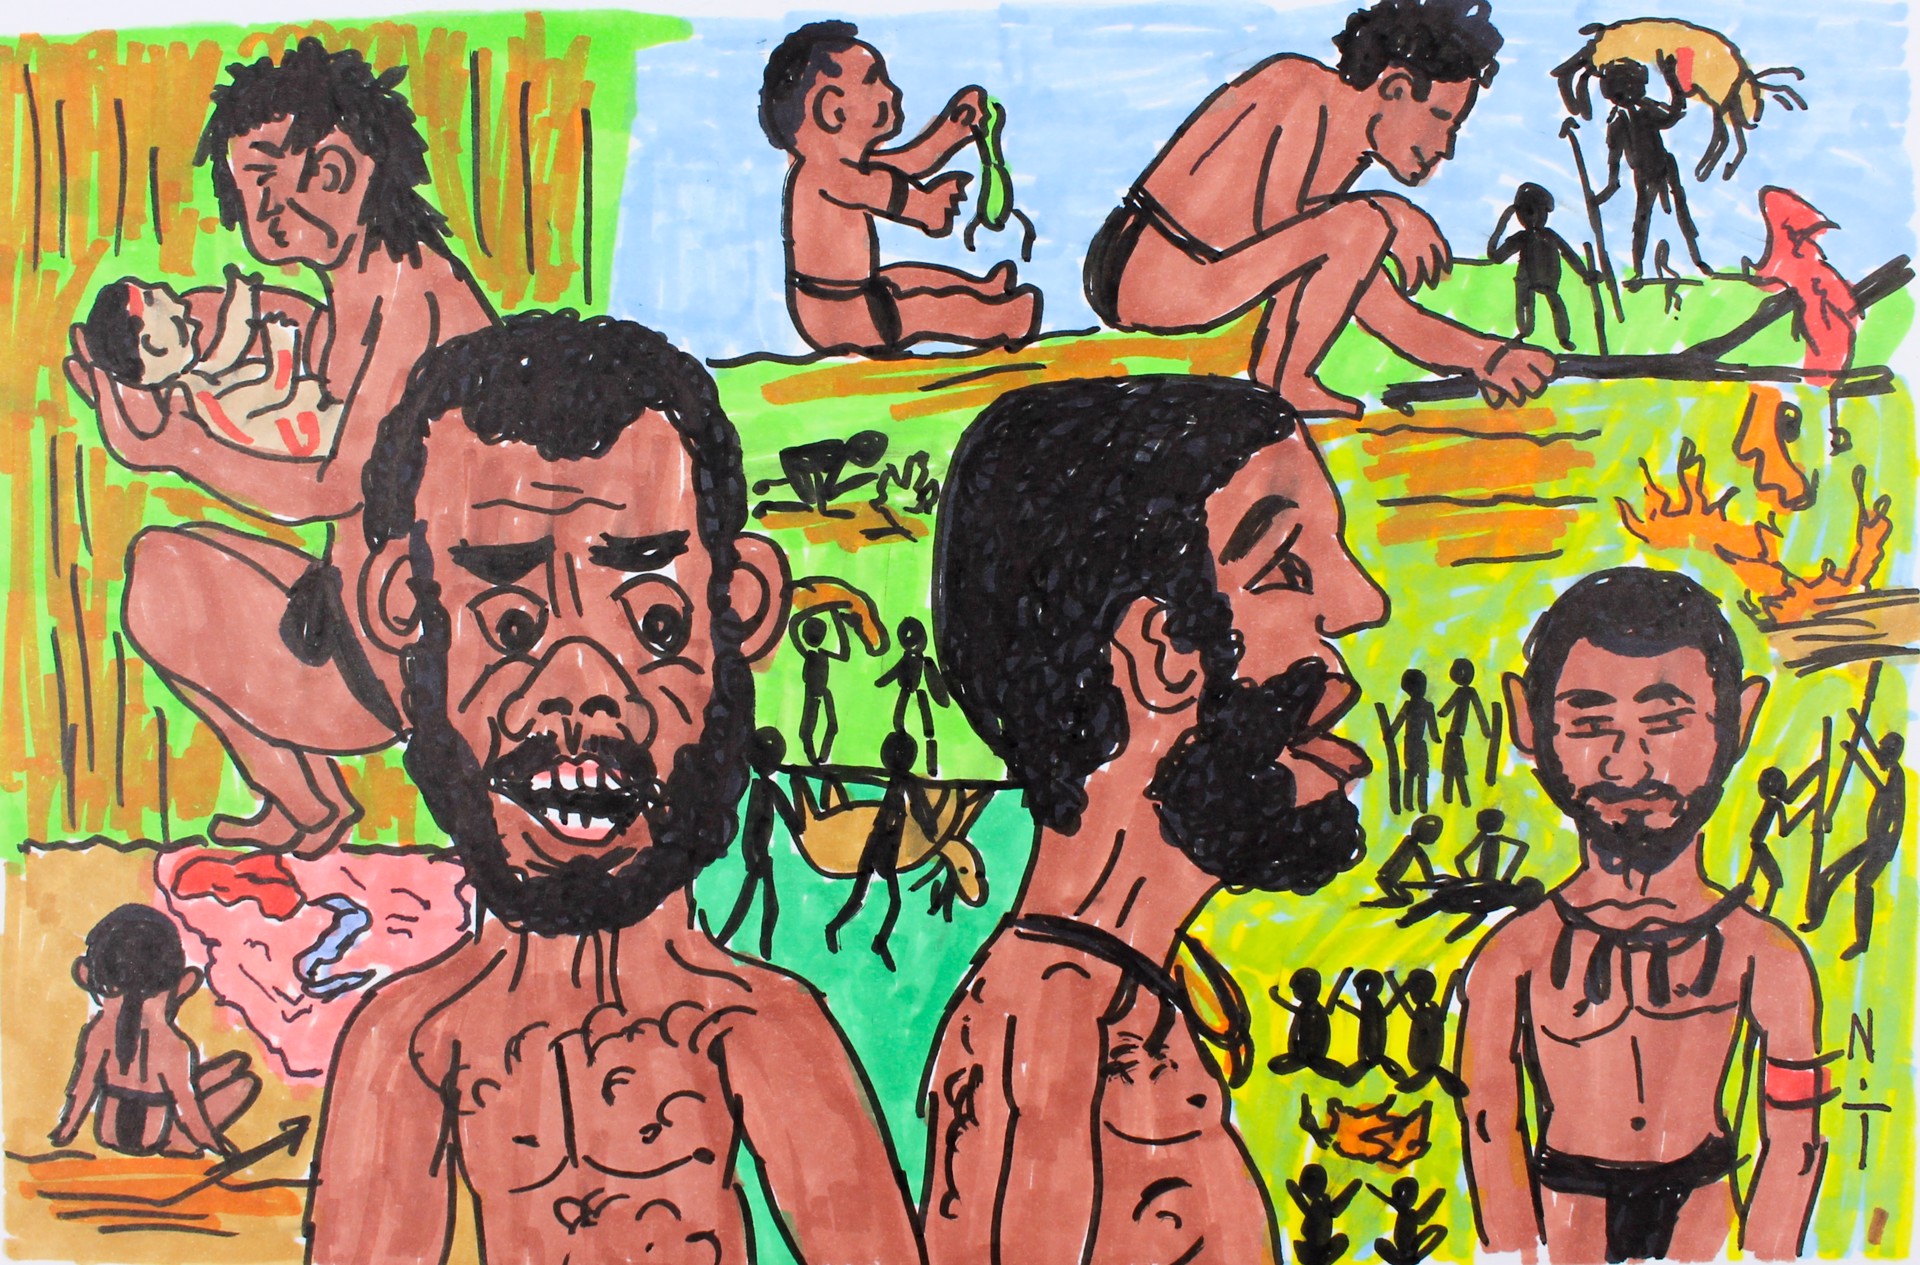 New Guinea Villagers by Nonja Tiller